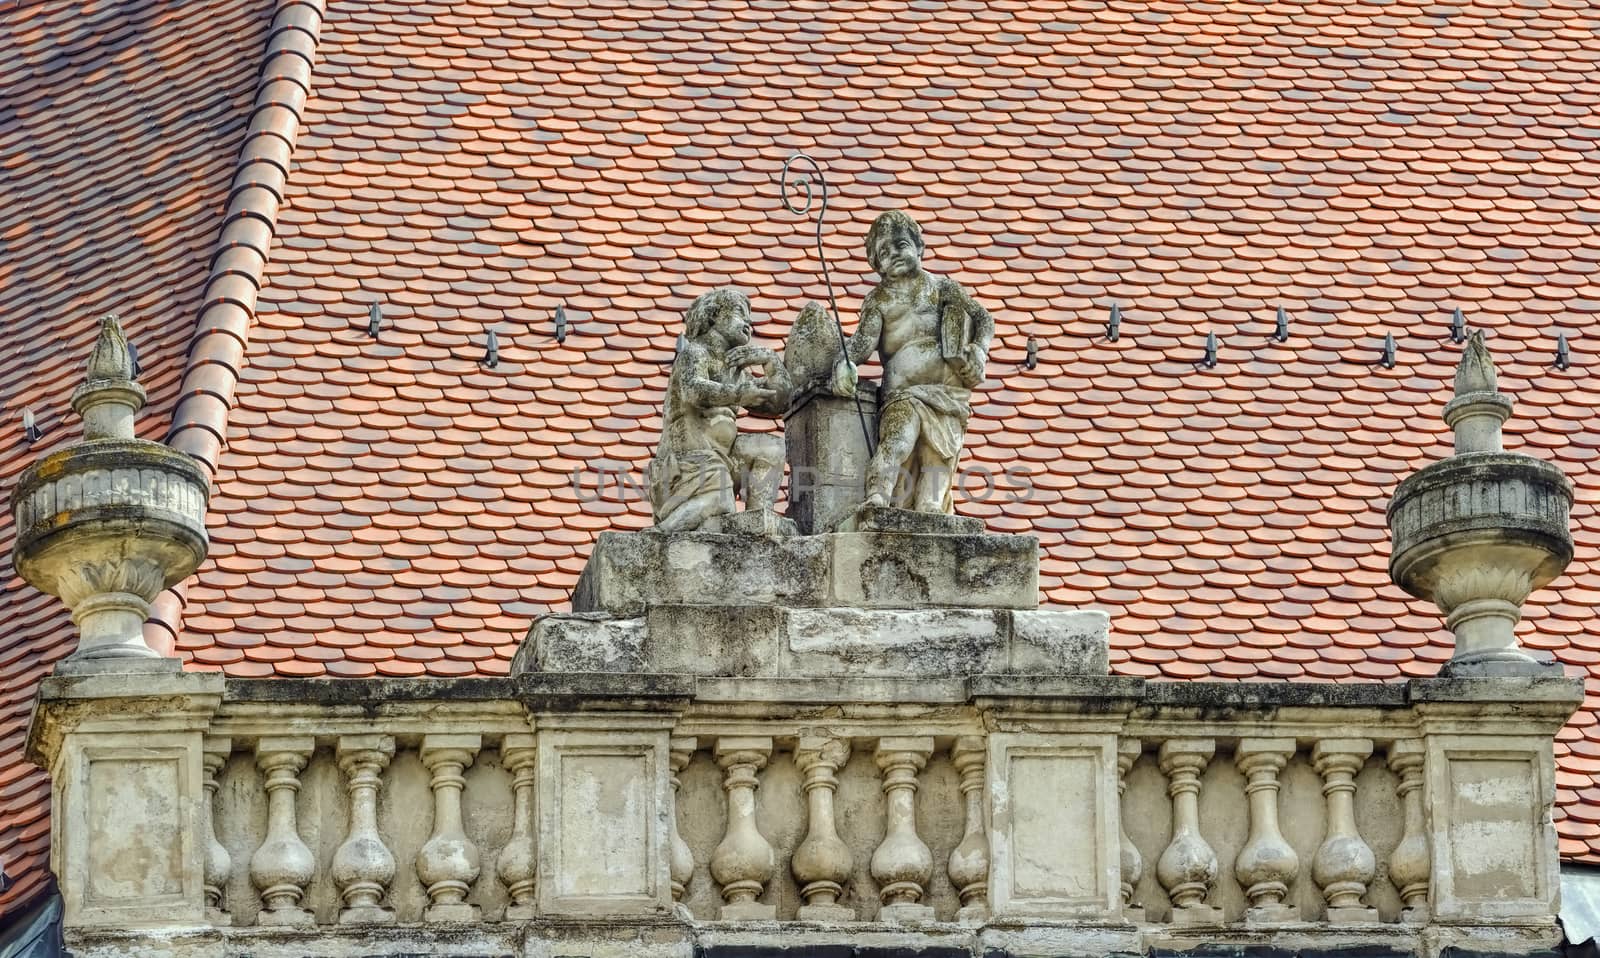 Sculpture on the Roof of a House in Szekesfehervar, Hungary